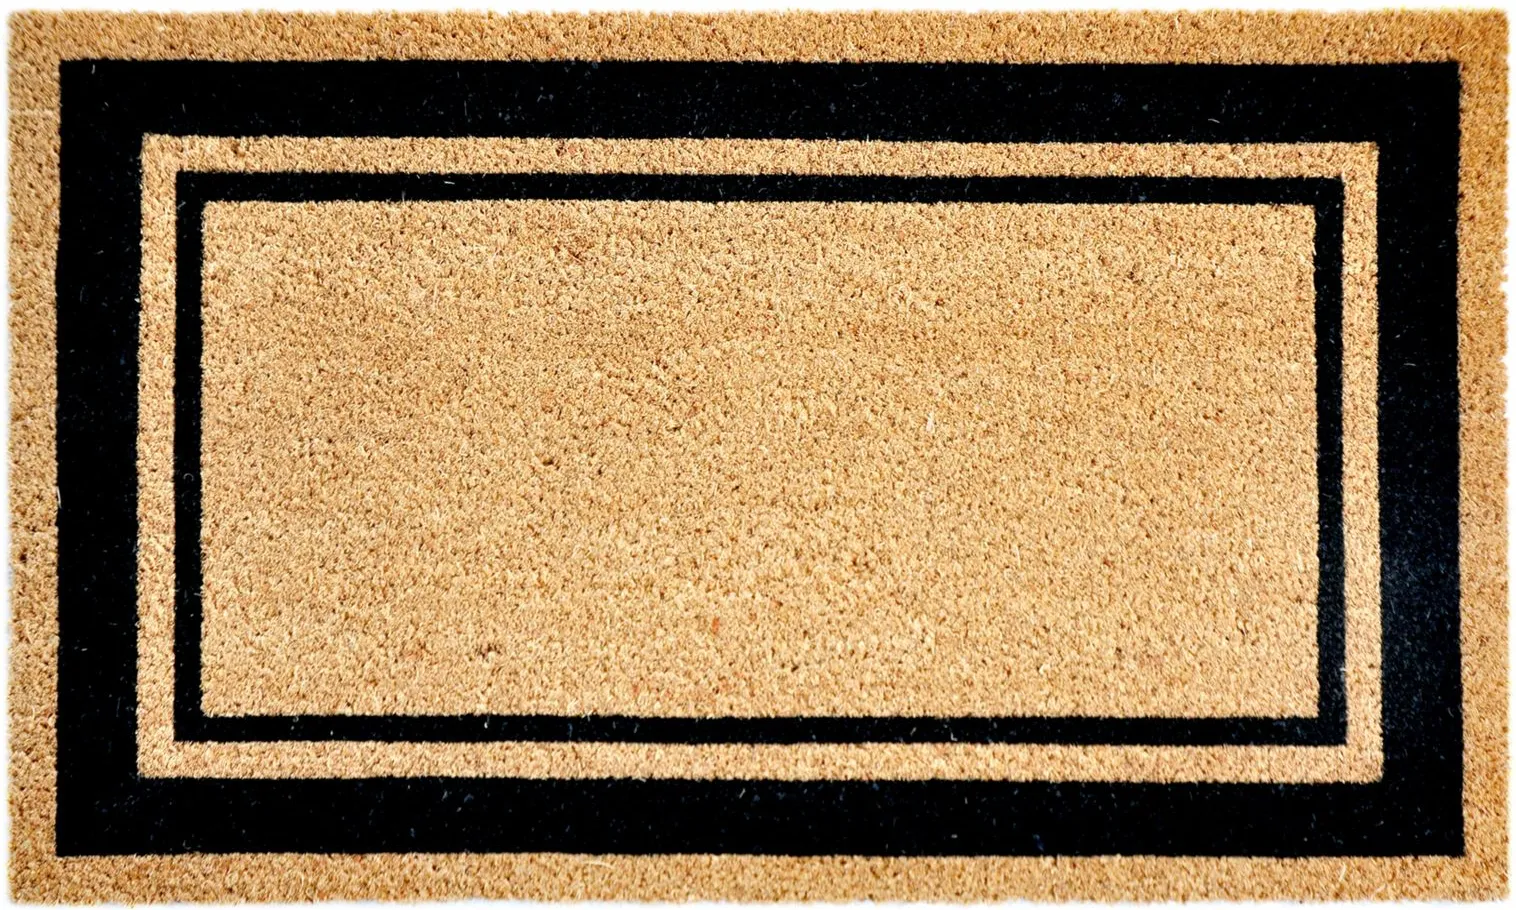 Liora Manne Natura Double Border Outdoor Mat in Black by Trans-Ocean Import Co Inc